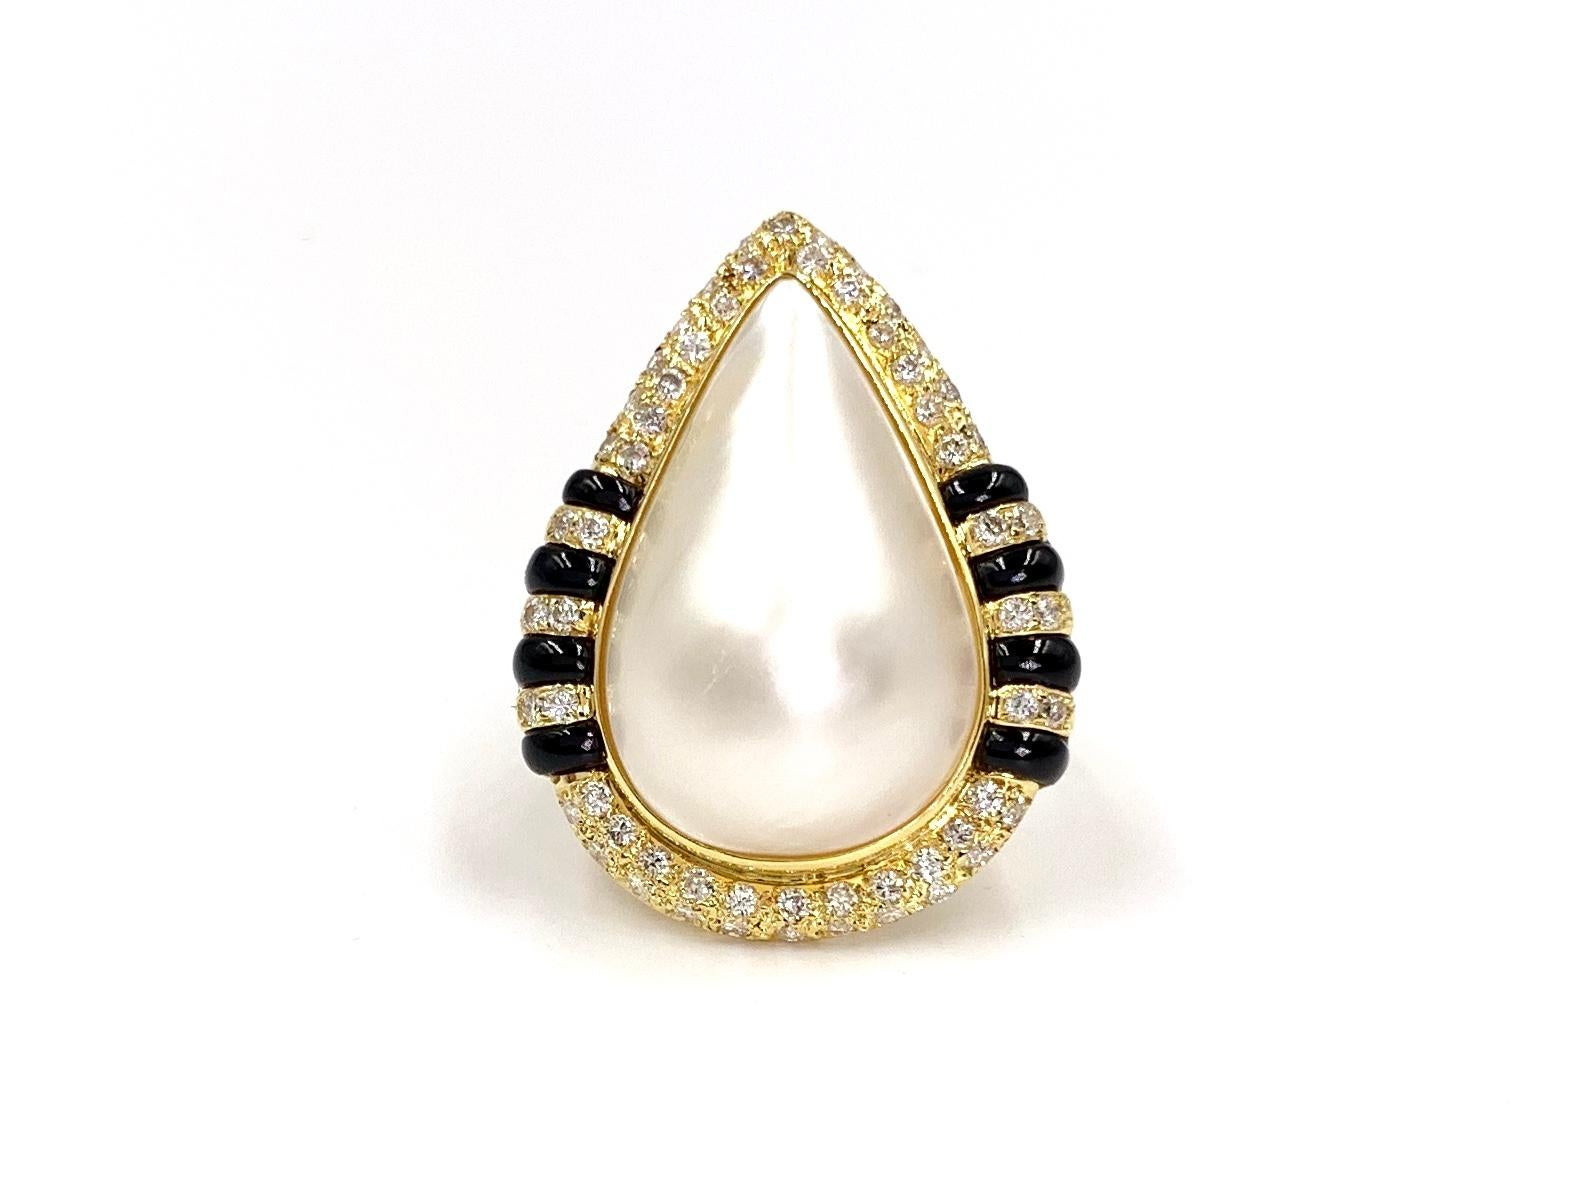 A modern design with a touch of Art Deco influence. This 18 karat yellow gold cocktail ring features a pear shape cultured pearl surrounded by .74 carats of expertly pavé set white diamonds and 8 pieces of polished black jade. Diamond quality is